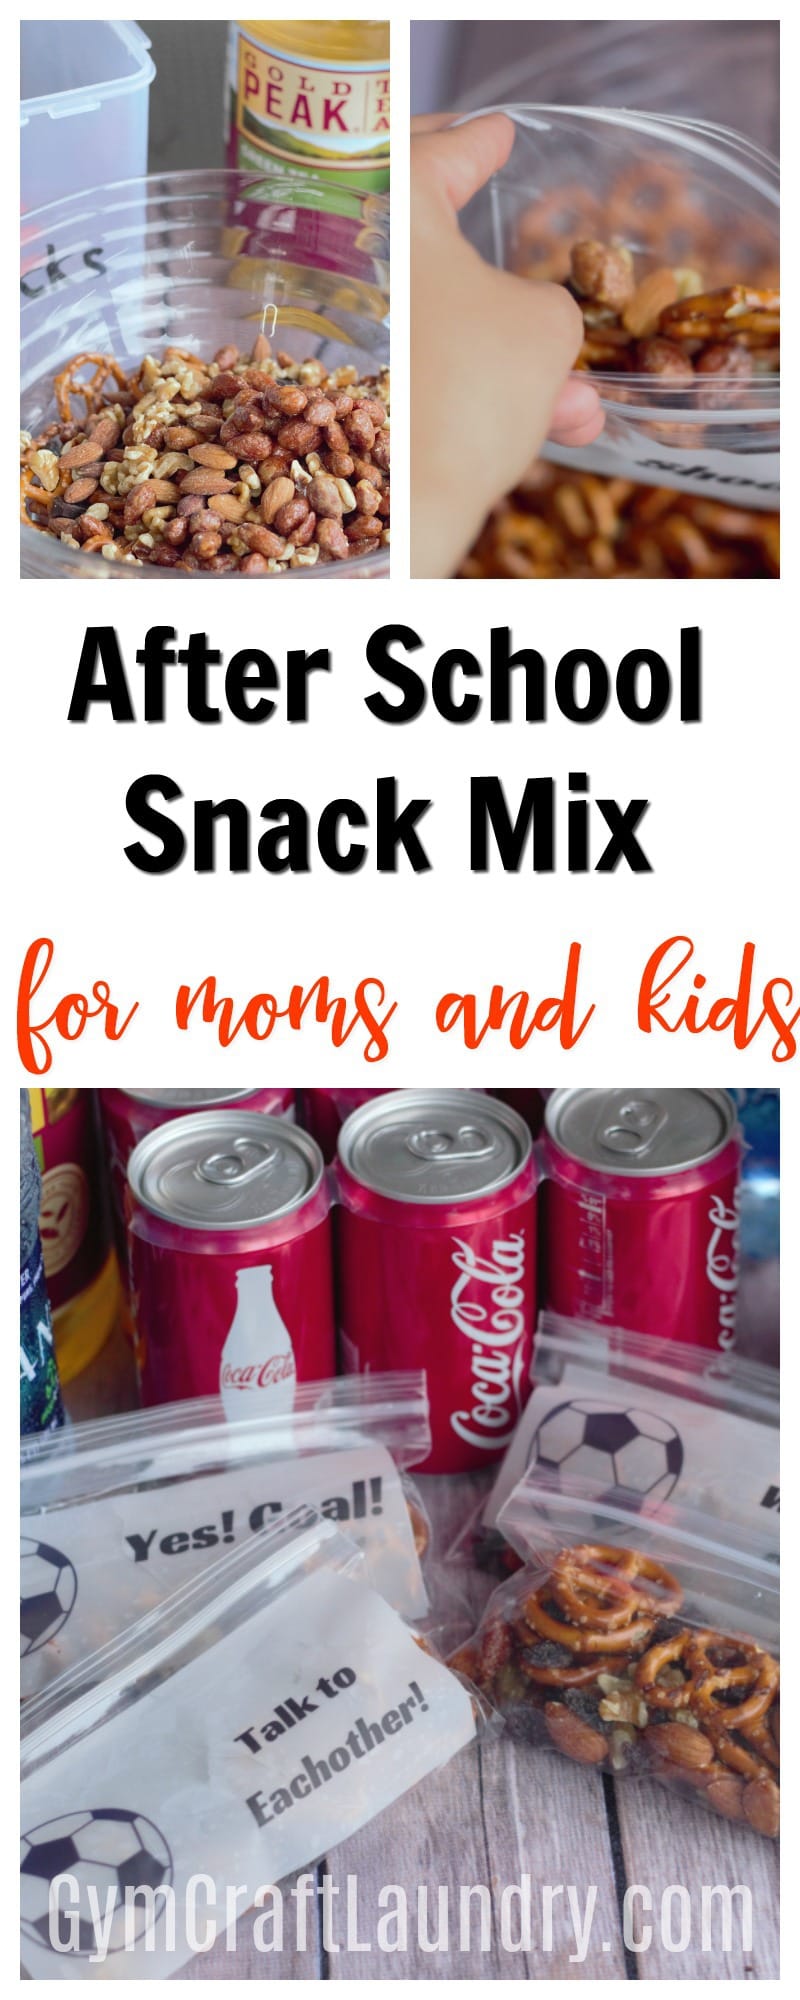 After school snack mix for moms and kids